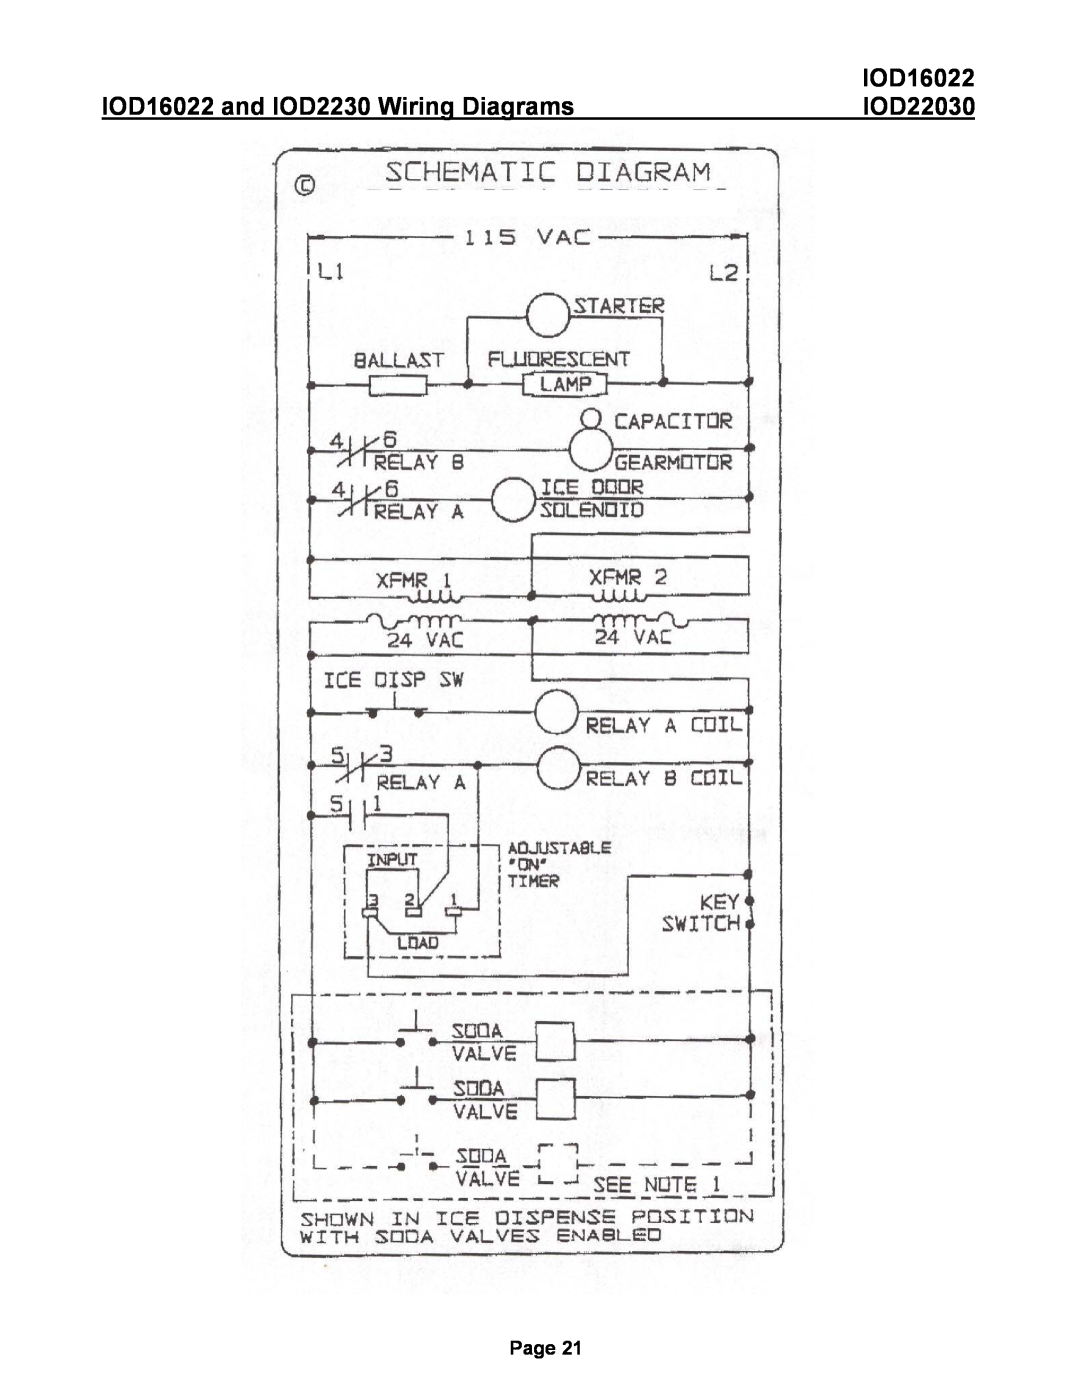 Ice-O-Matic manual IOD16022 and IOD2230 Wiring Diagrams, IOD22030, Page 